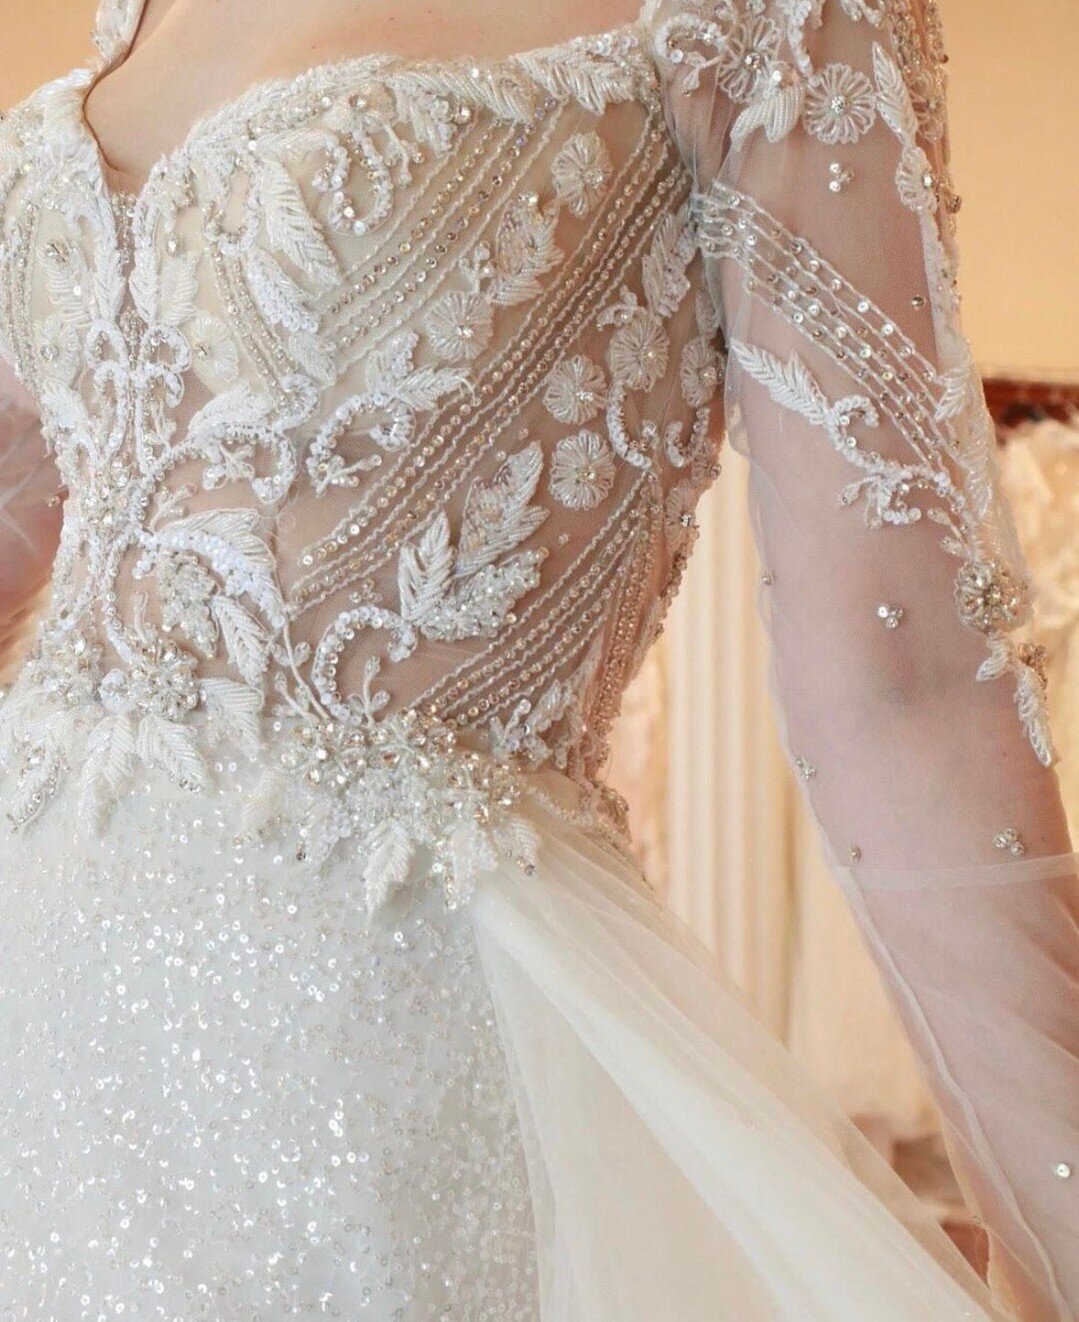 Details like these! @Eveofmilady wedding gown styles only get better in person. Unique and high-class.

Shop latest @Eveofmilady arrivals at Susan Deborah Bridal. Call us for an apointment today.

#luxurybride#wedding2023#bride2023#nybfw#dreamwedding